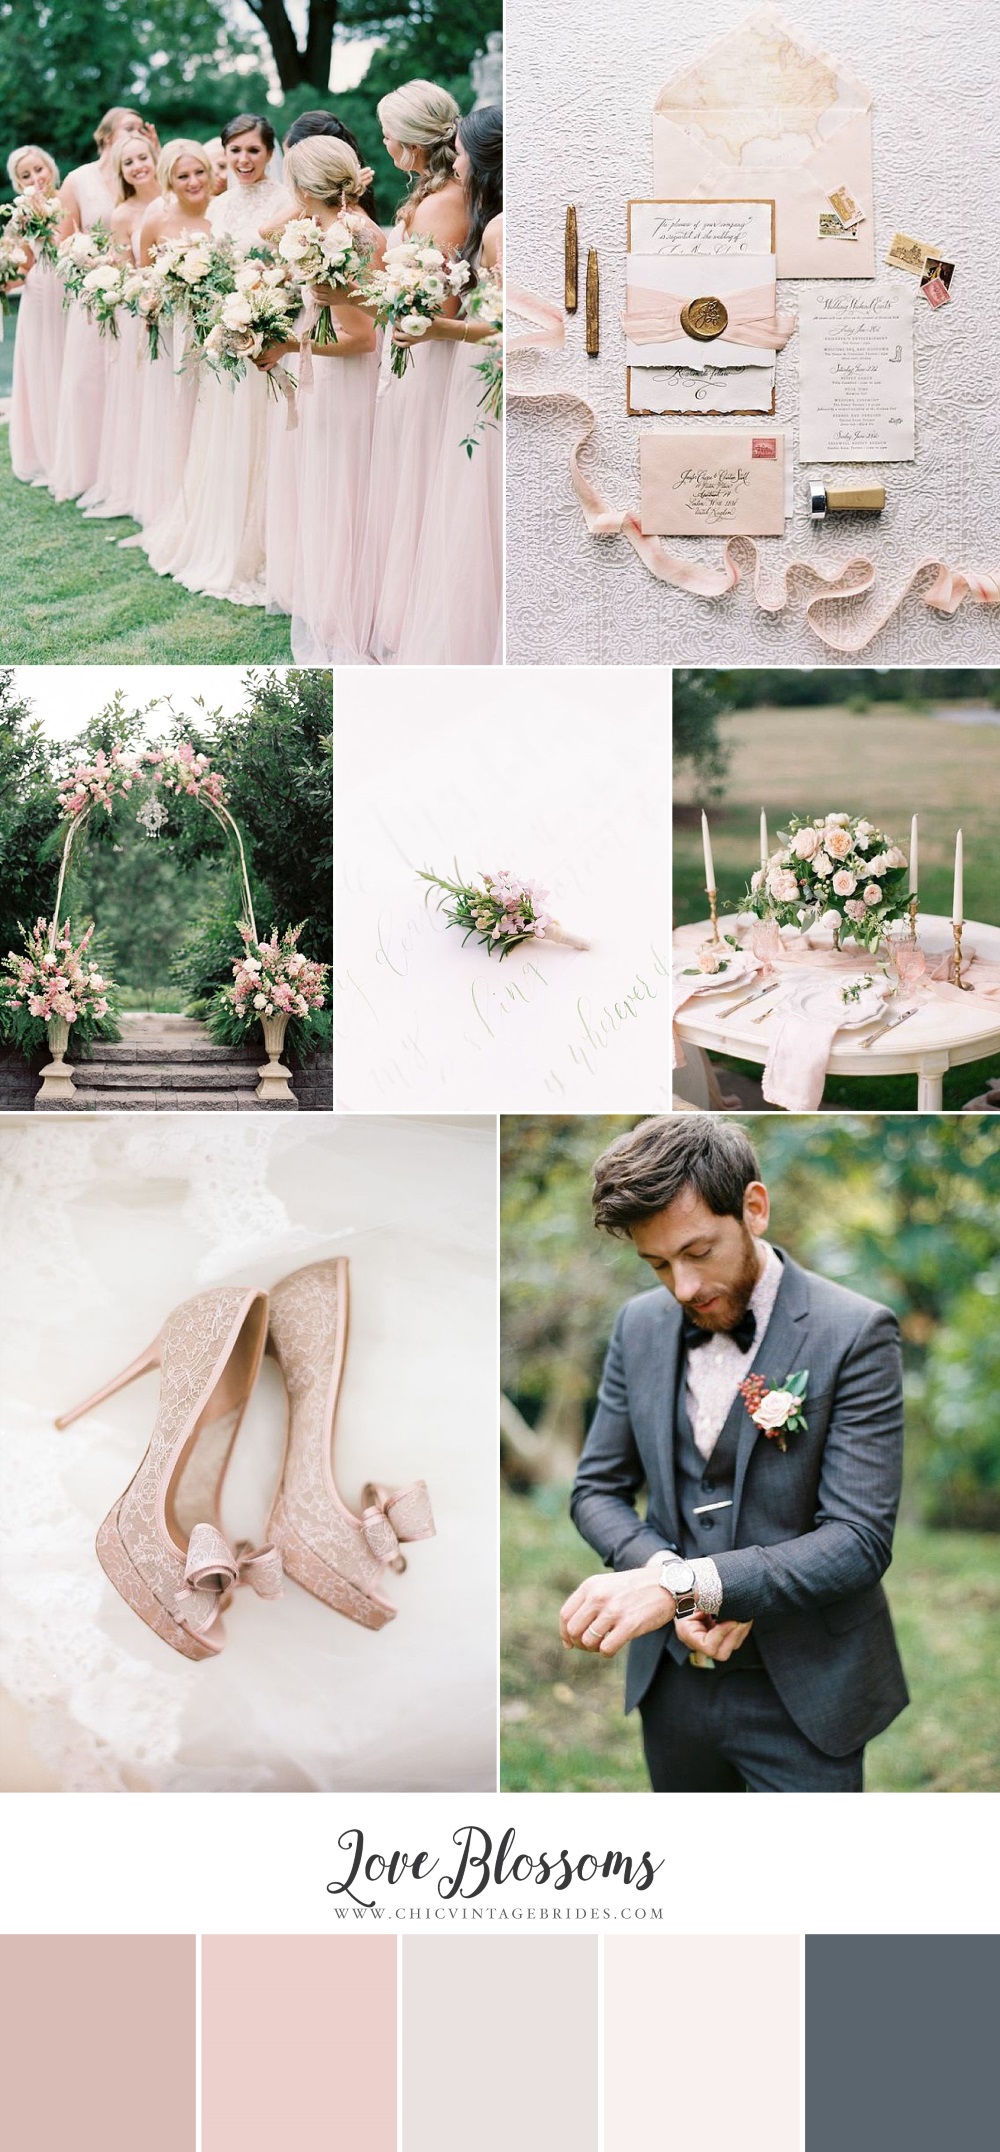 Love Blossoms - Spring Wedding Inspiration in a Pretty Palette of Pinks & Dusky Blue